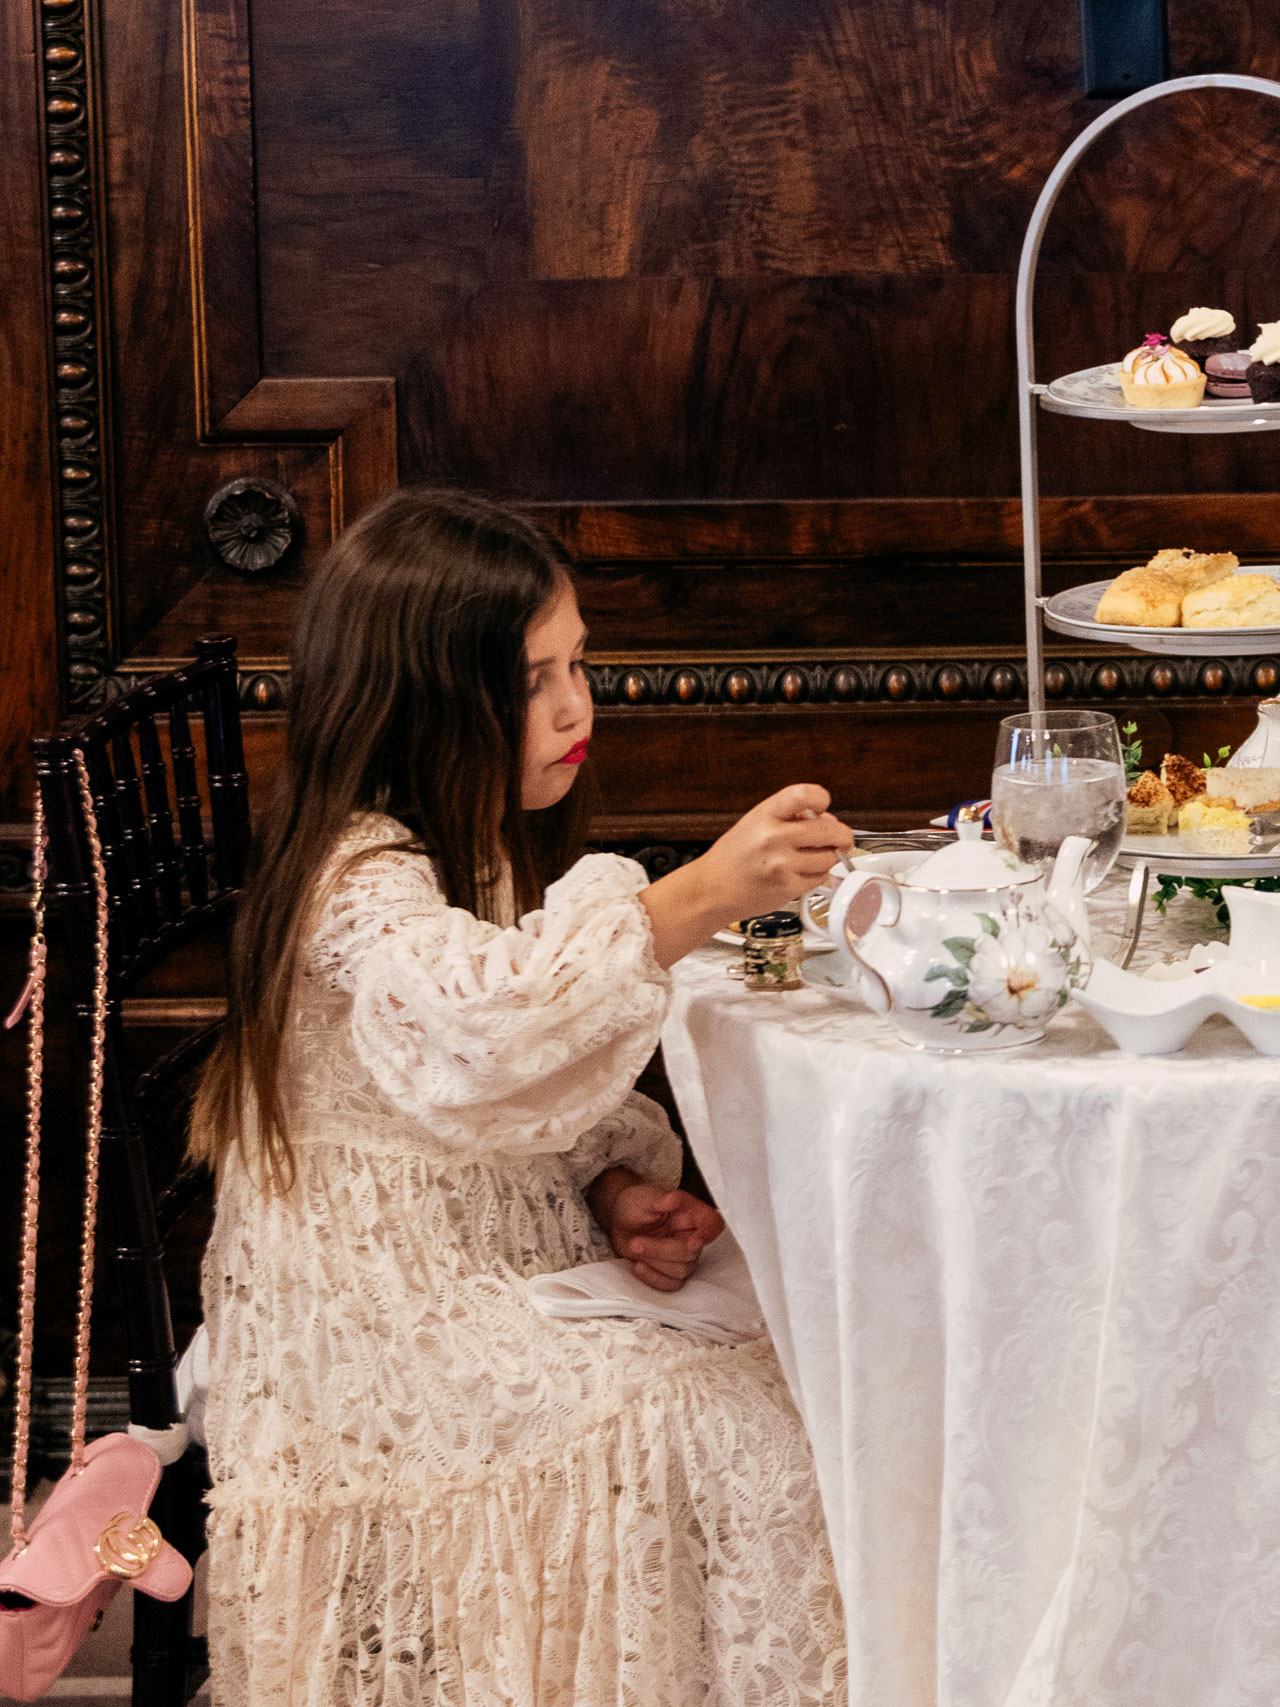 Young girl in a light pink dress enjoying tea at the Hermitage Hotel Ballroom on mothers day.